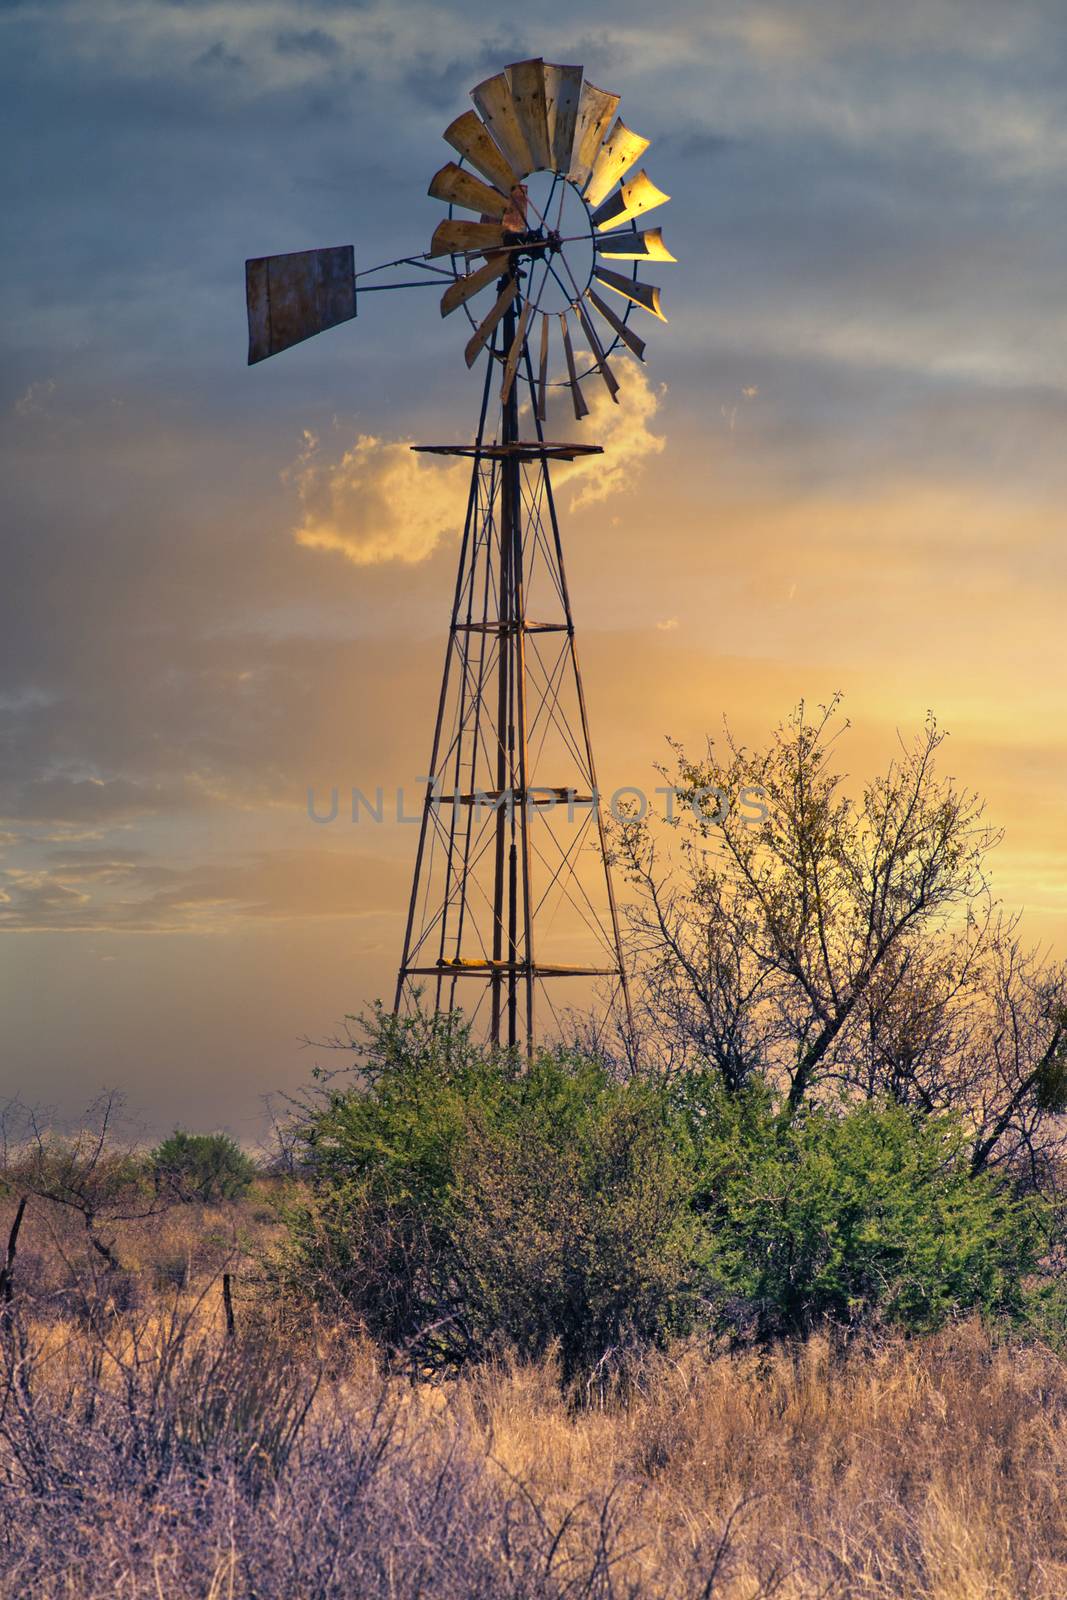 Agricultural farm water pump windmill in the field during sunset by kb79